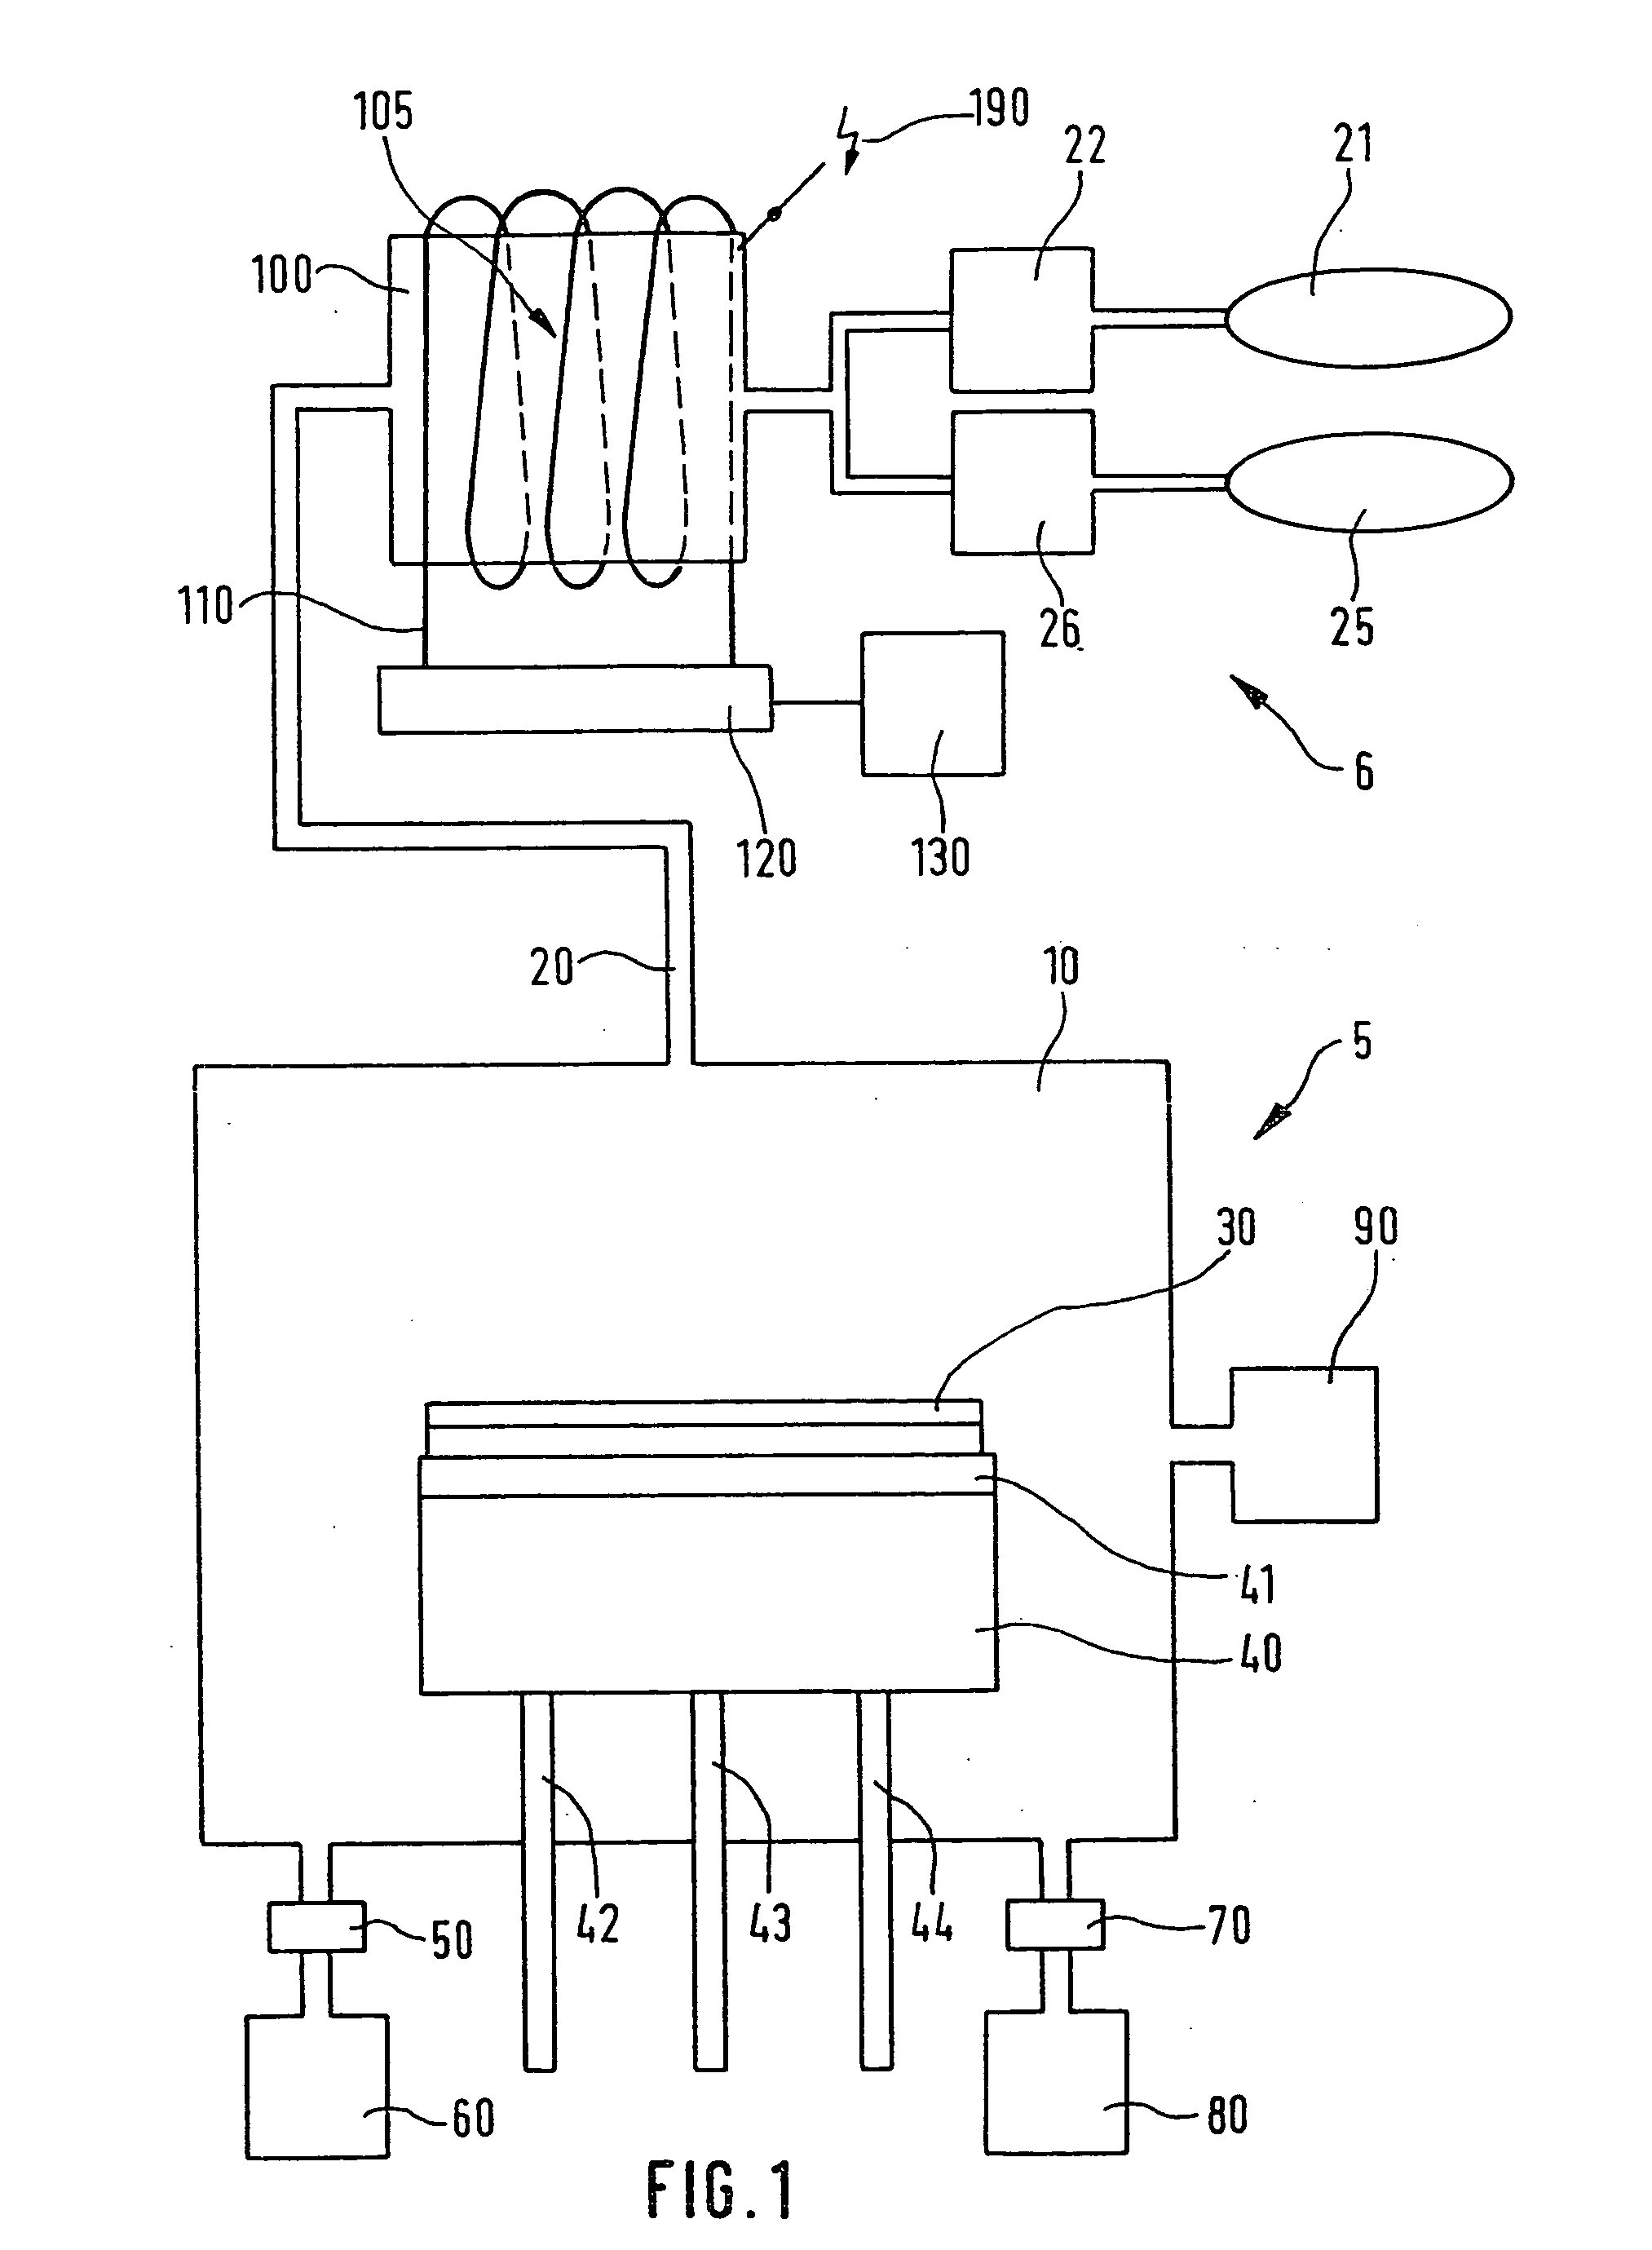 Device and method for the production of chlorotriflouride and system for etching semiconductor substrates using said device